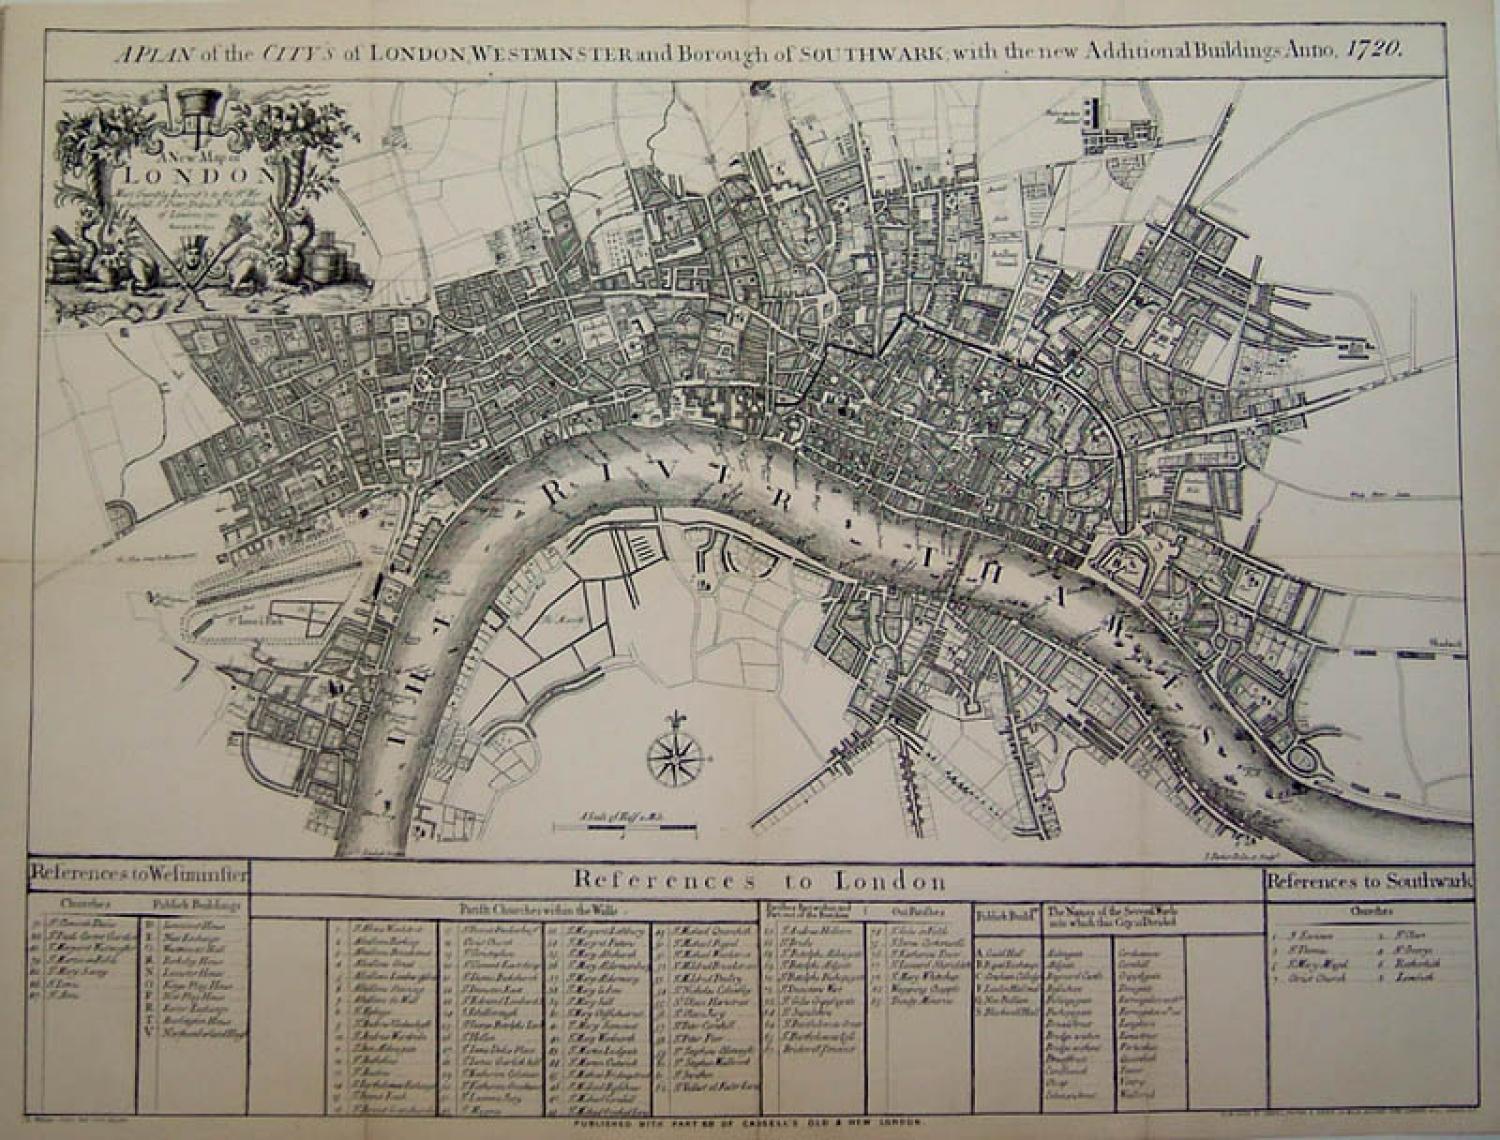 SOLD A plan of the Citys of London and Westminster